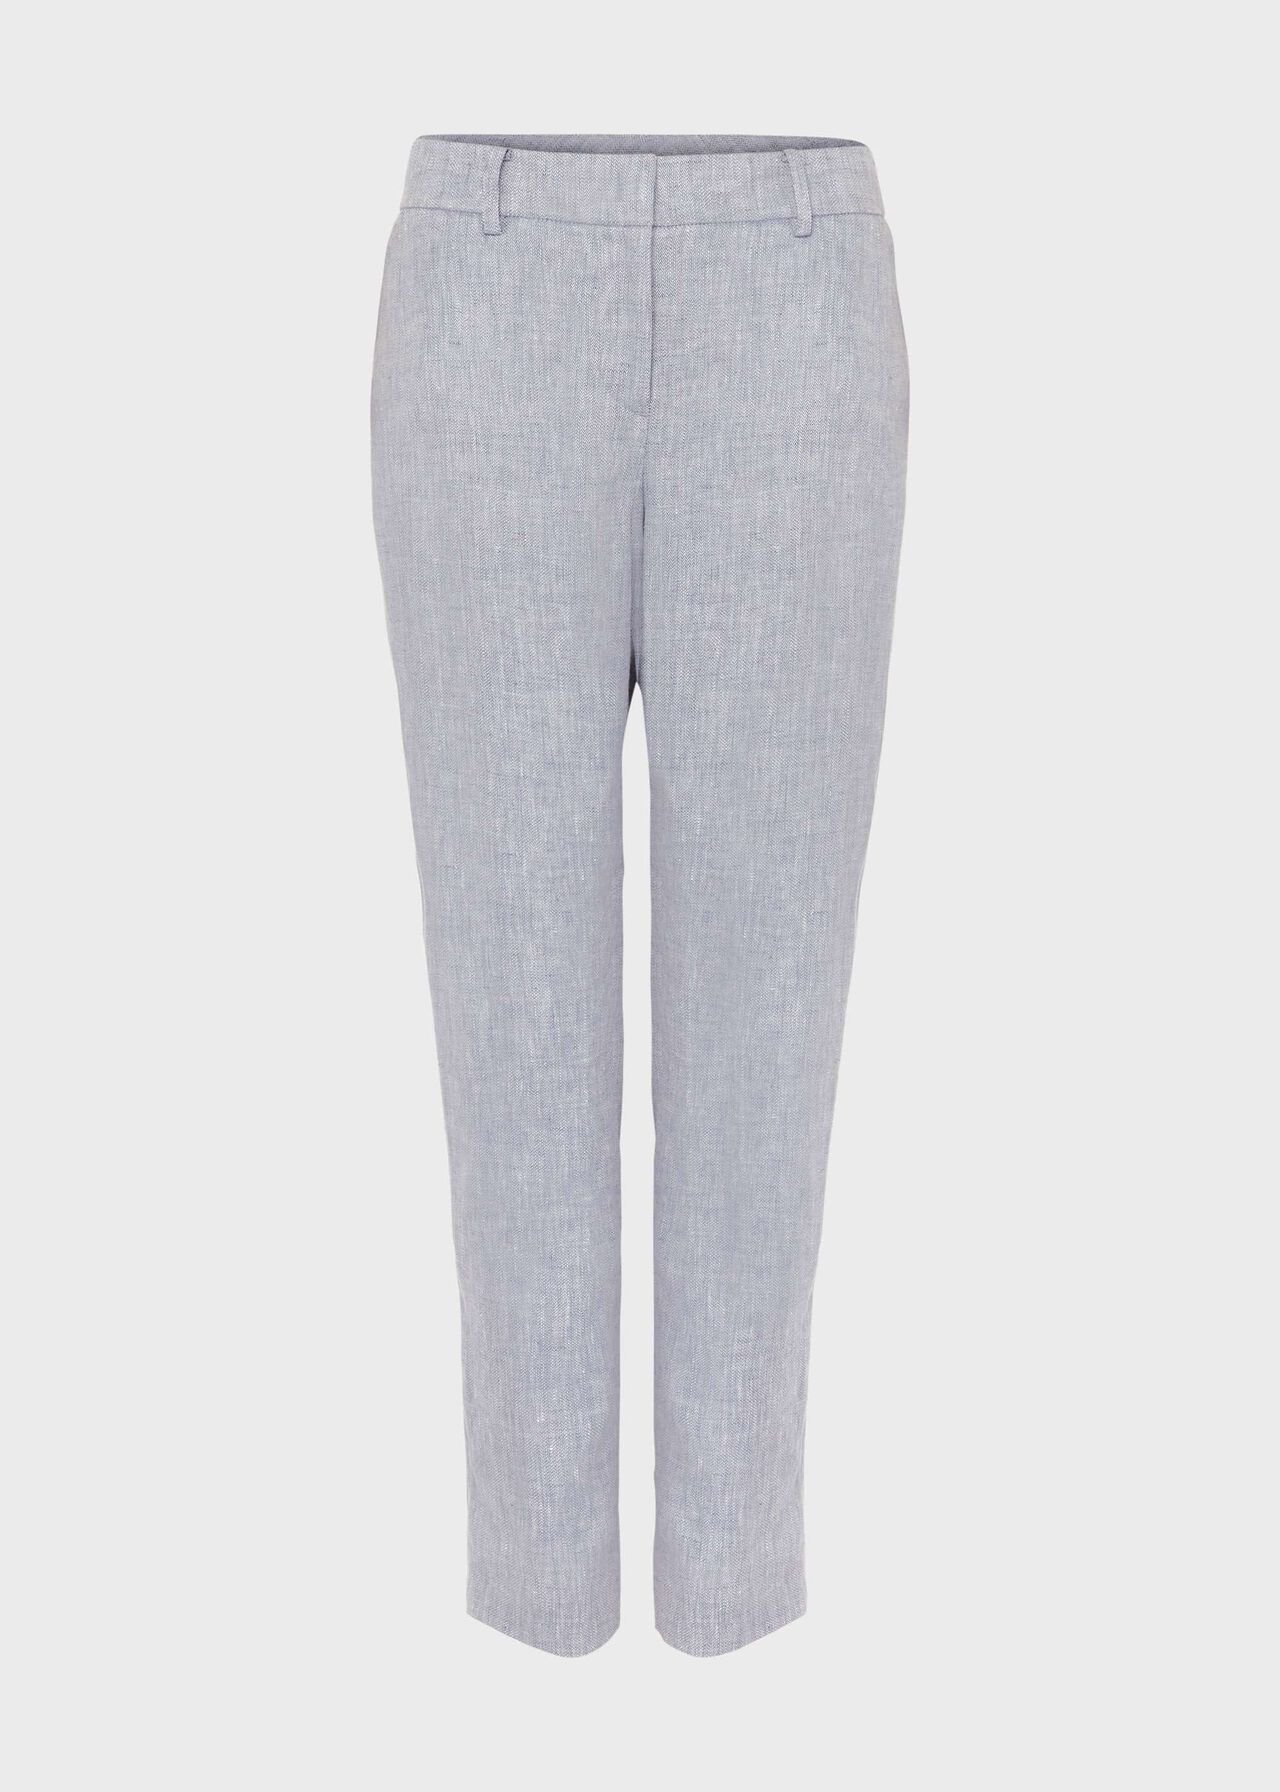 Ivana Linen Tapered Trousers, Pale Blue, hi-res